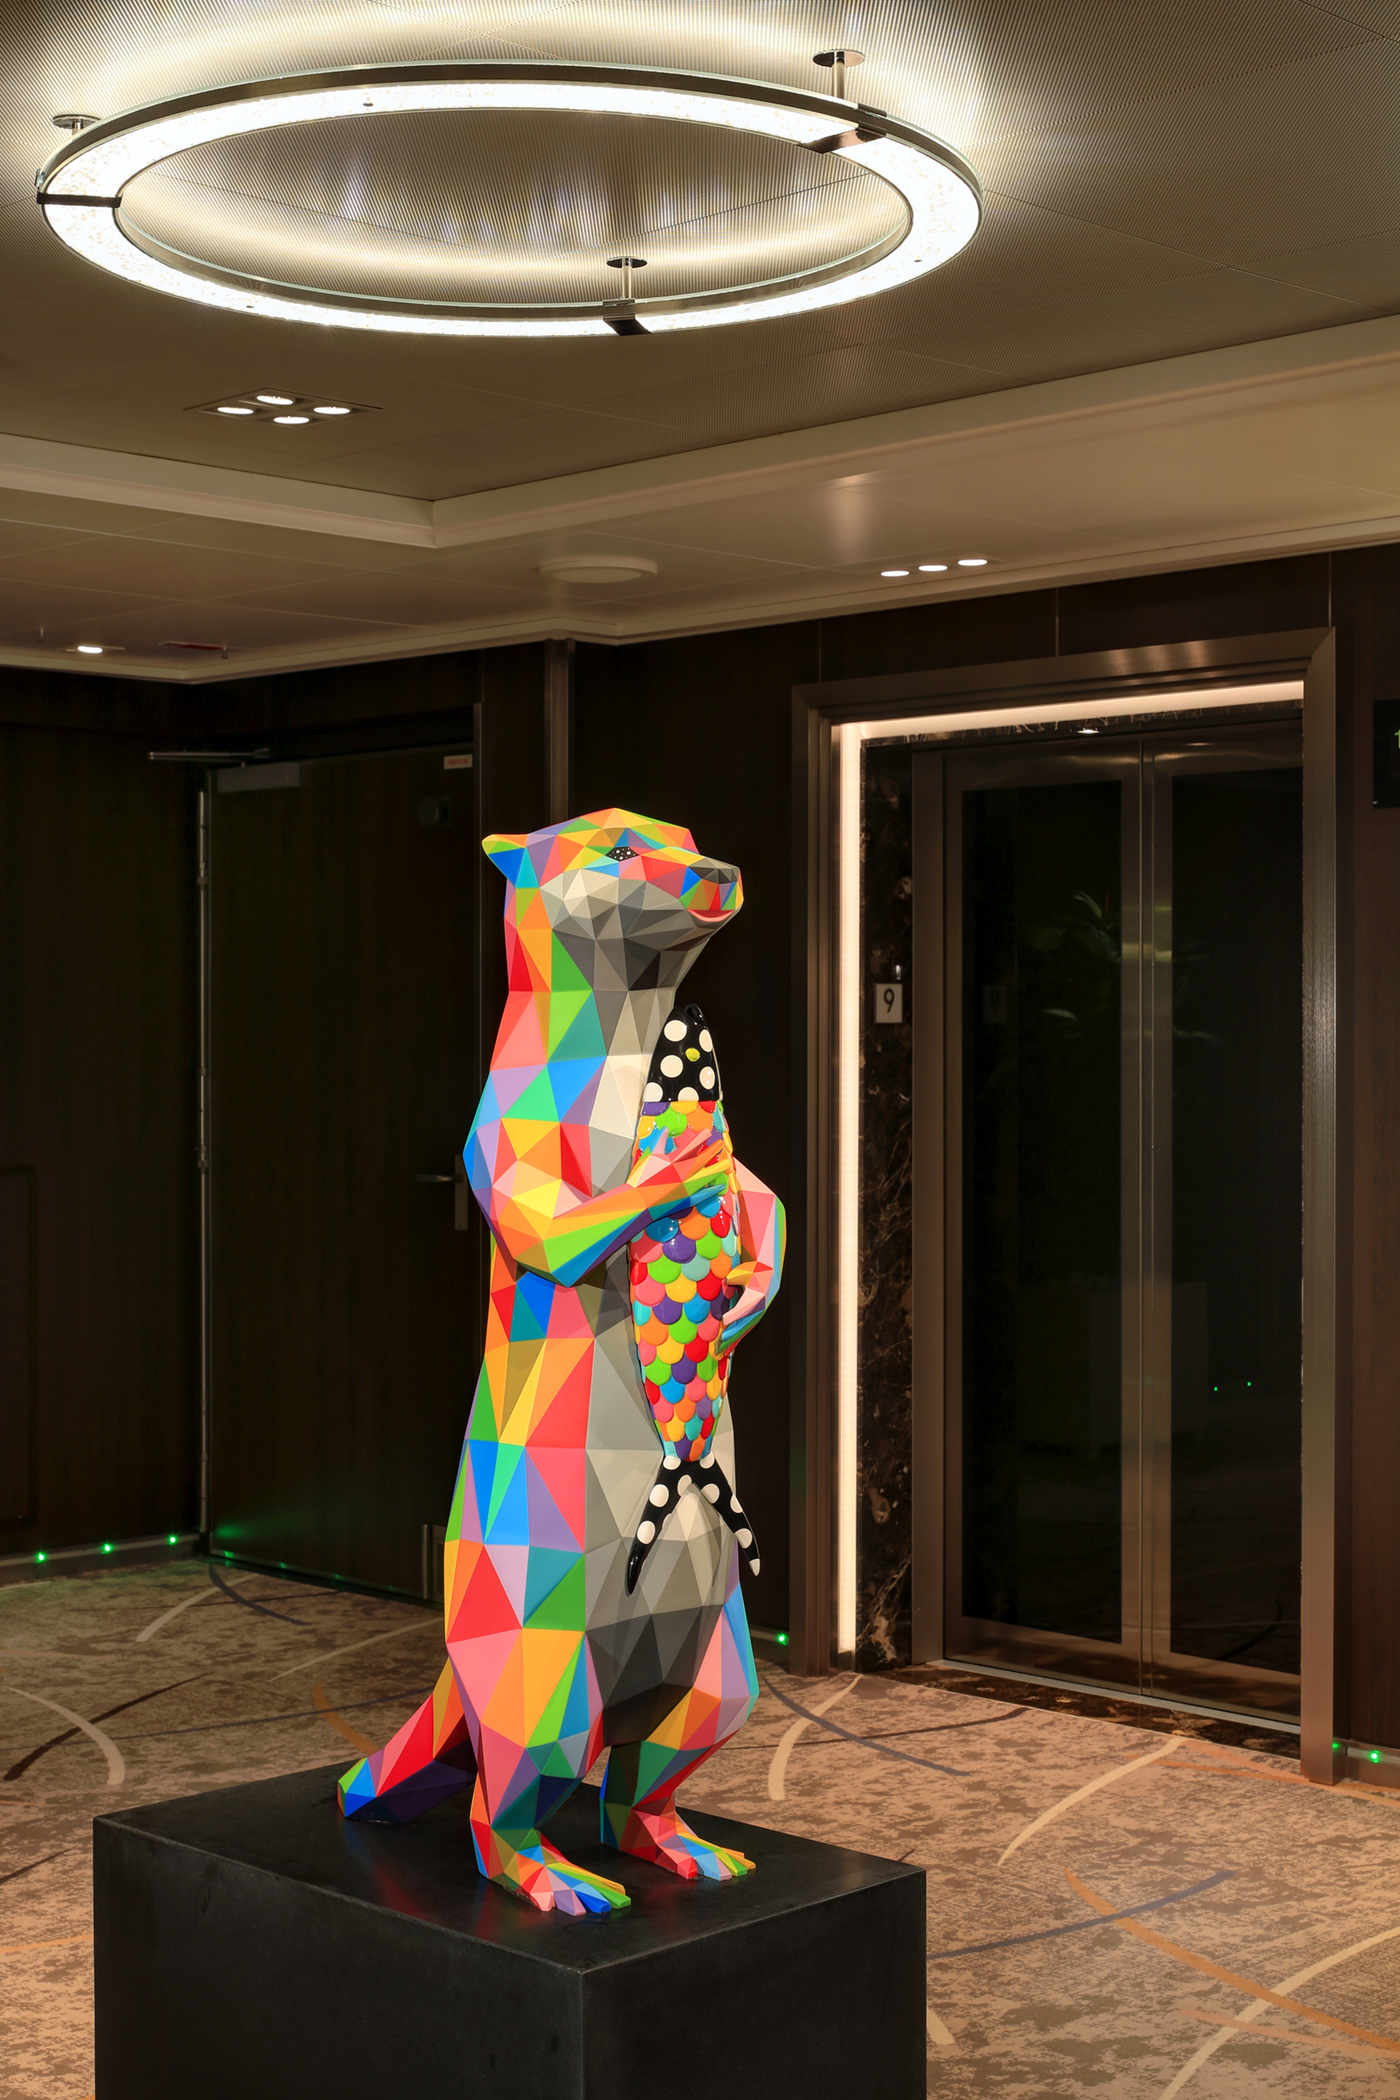 Okuda San Miguel’s fiberglass sculpture of an otter in the aft stairwell lobby on Deck 9